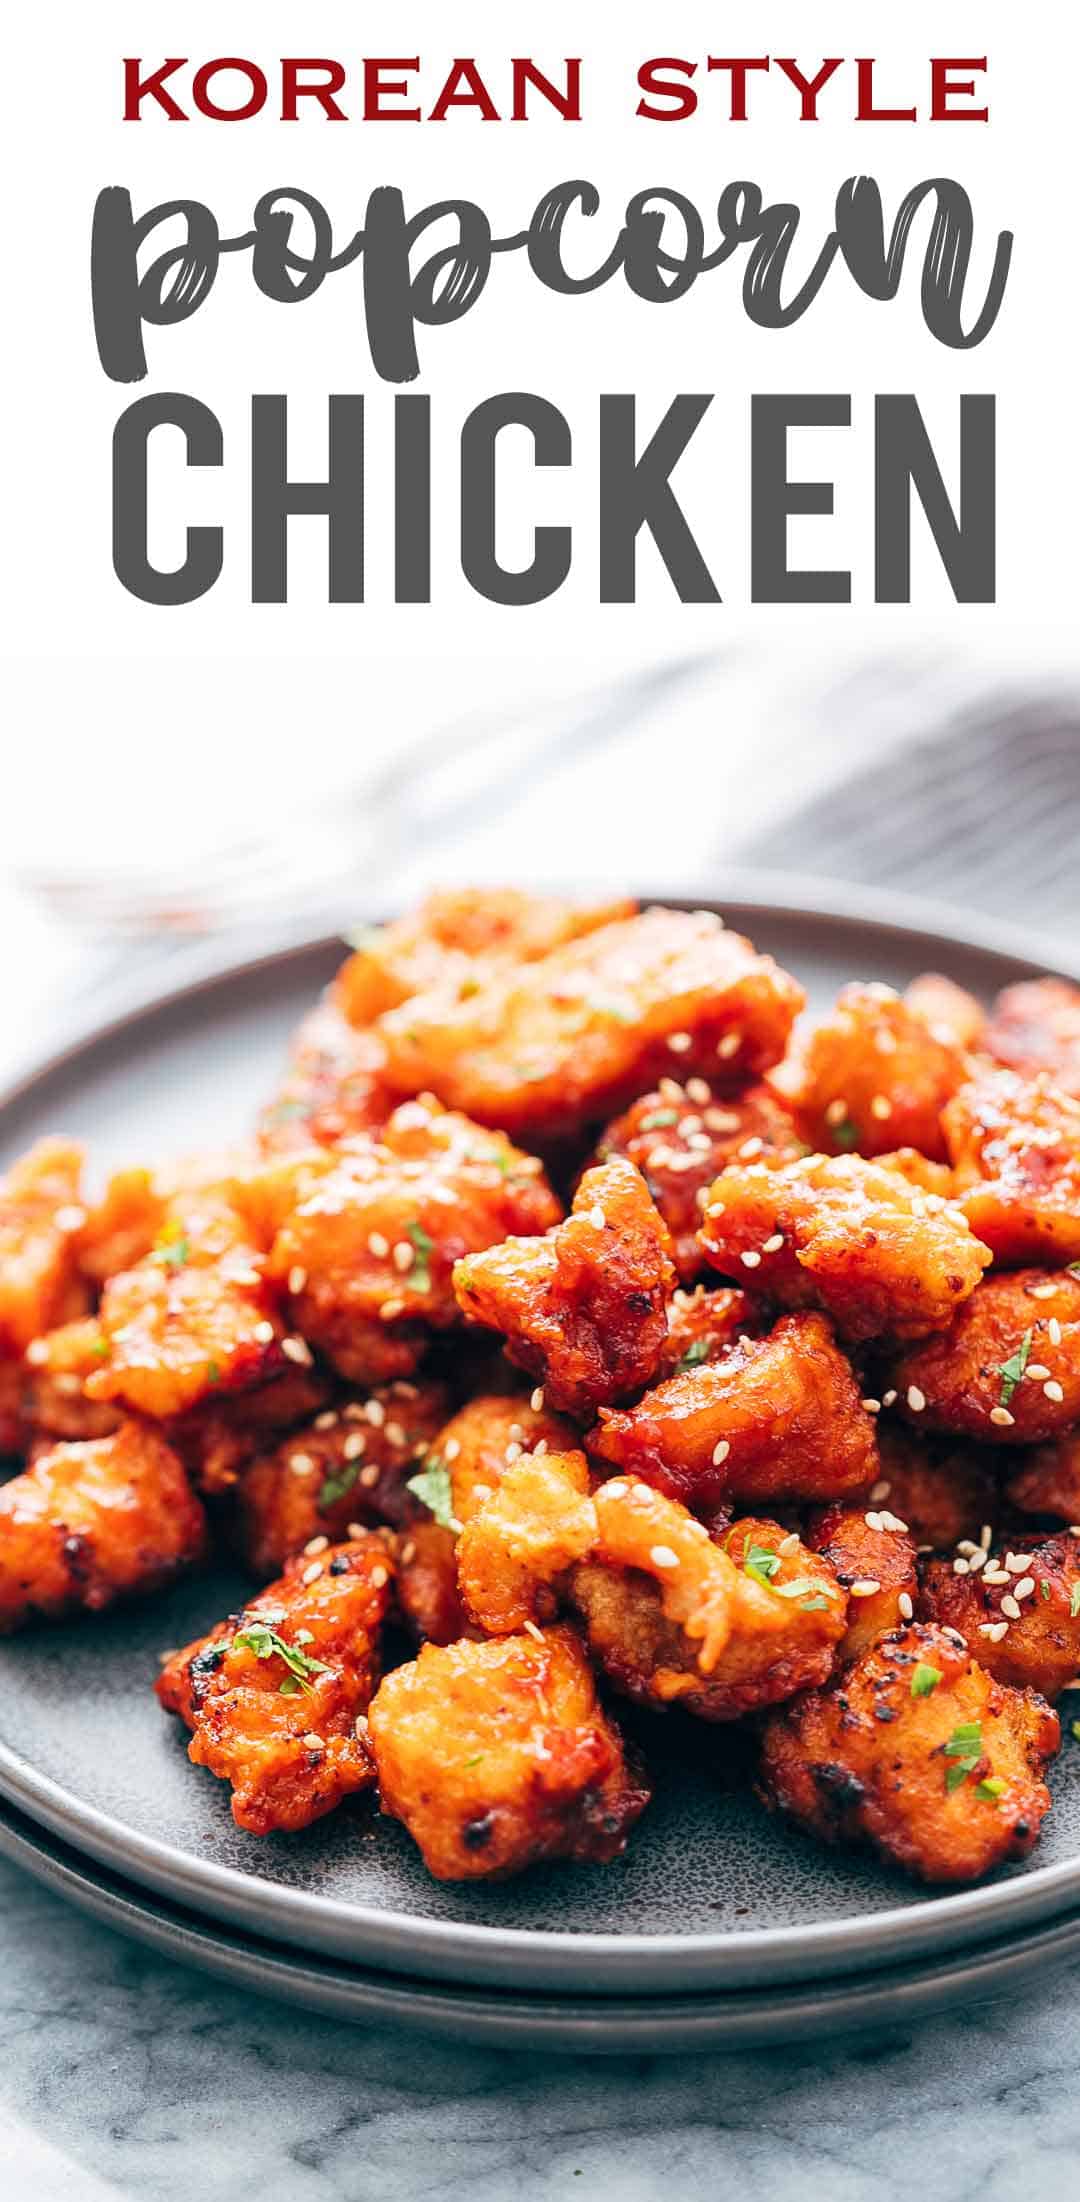 KOREAN POPCORN CHICKEN is sticky, spicy, tangy and crunchy. Inspired by the hyper-famous Korean street snack, Dakgangjeong, boneless chicken is deep fried and tossed in a sweet, sour and spicy sauce that makes every bite super addictive. #chicken #appetizer #party #snack #recipe